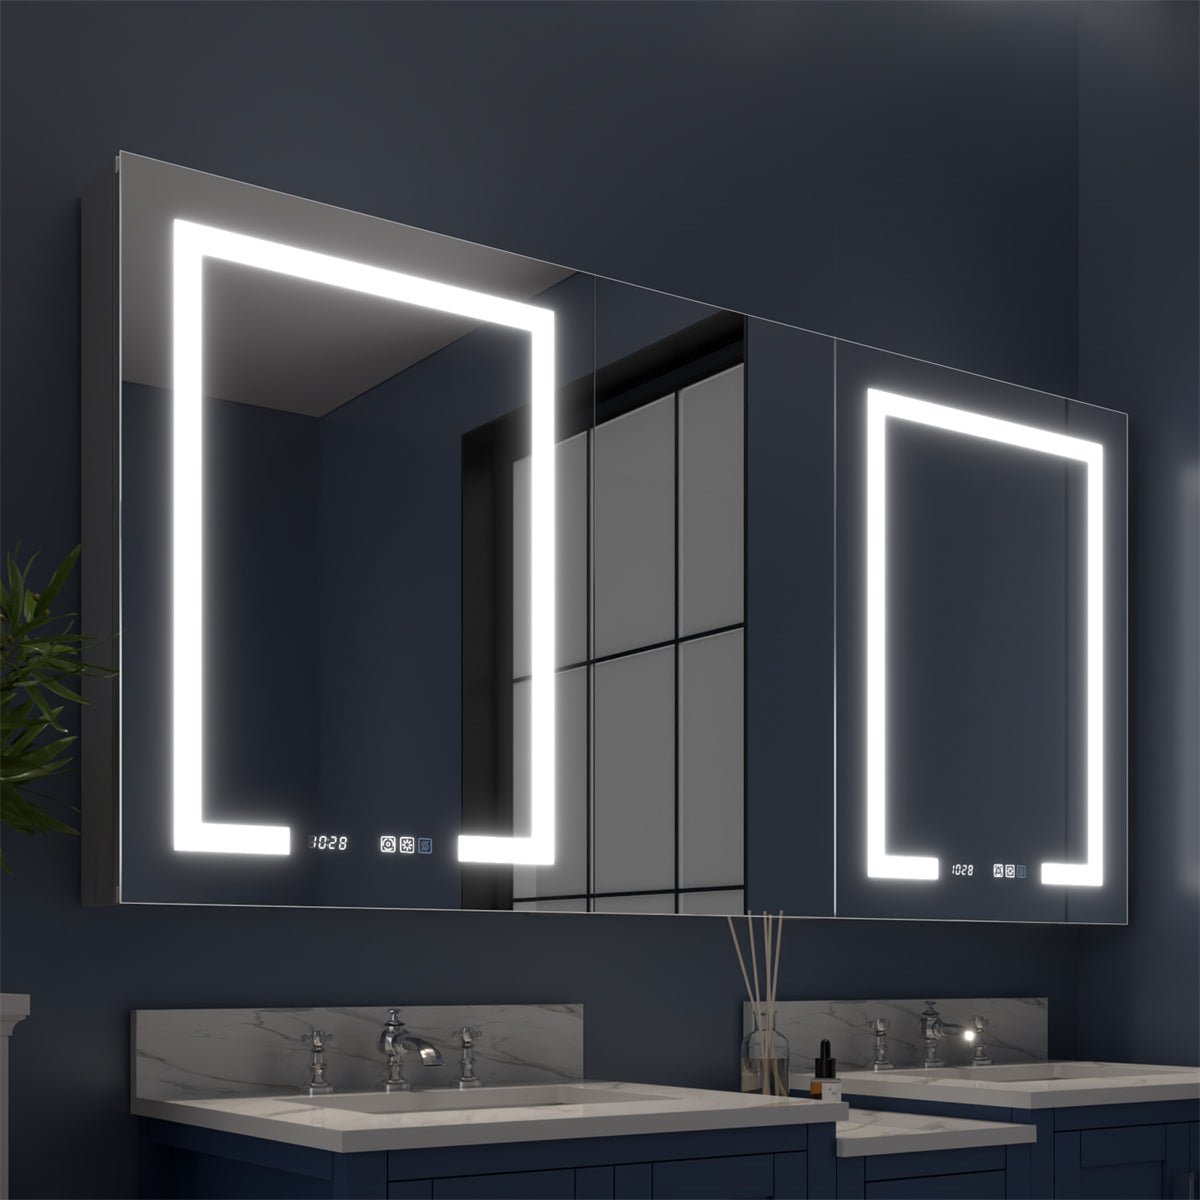 Boost-M2 64" W x 32" H Bathroom Light Narrow Medicine Cabinets with Vanity Mirror Recessed or Surface - ExBriteUSA